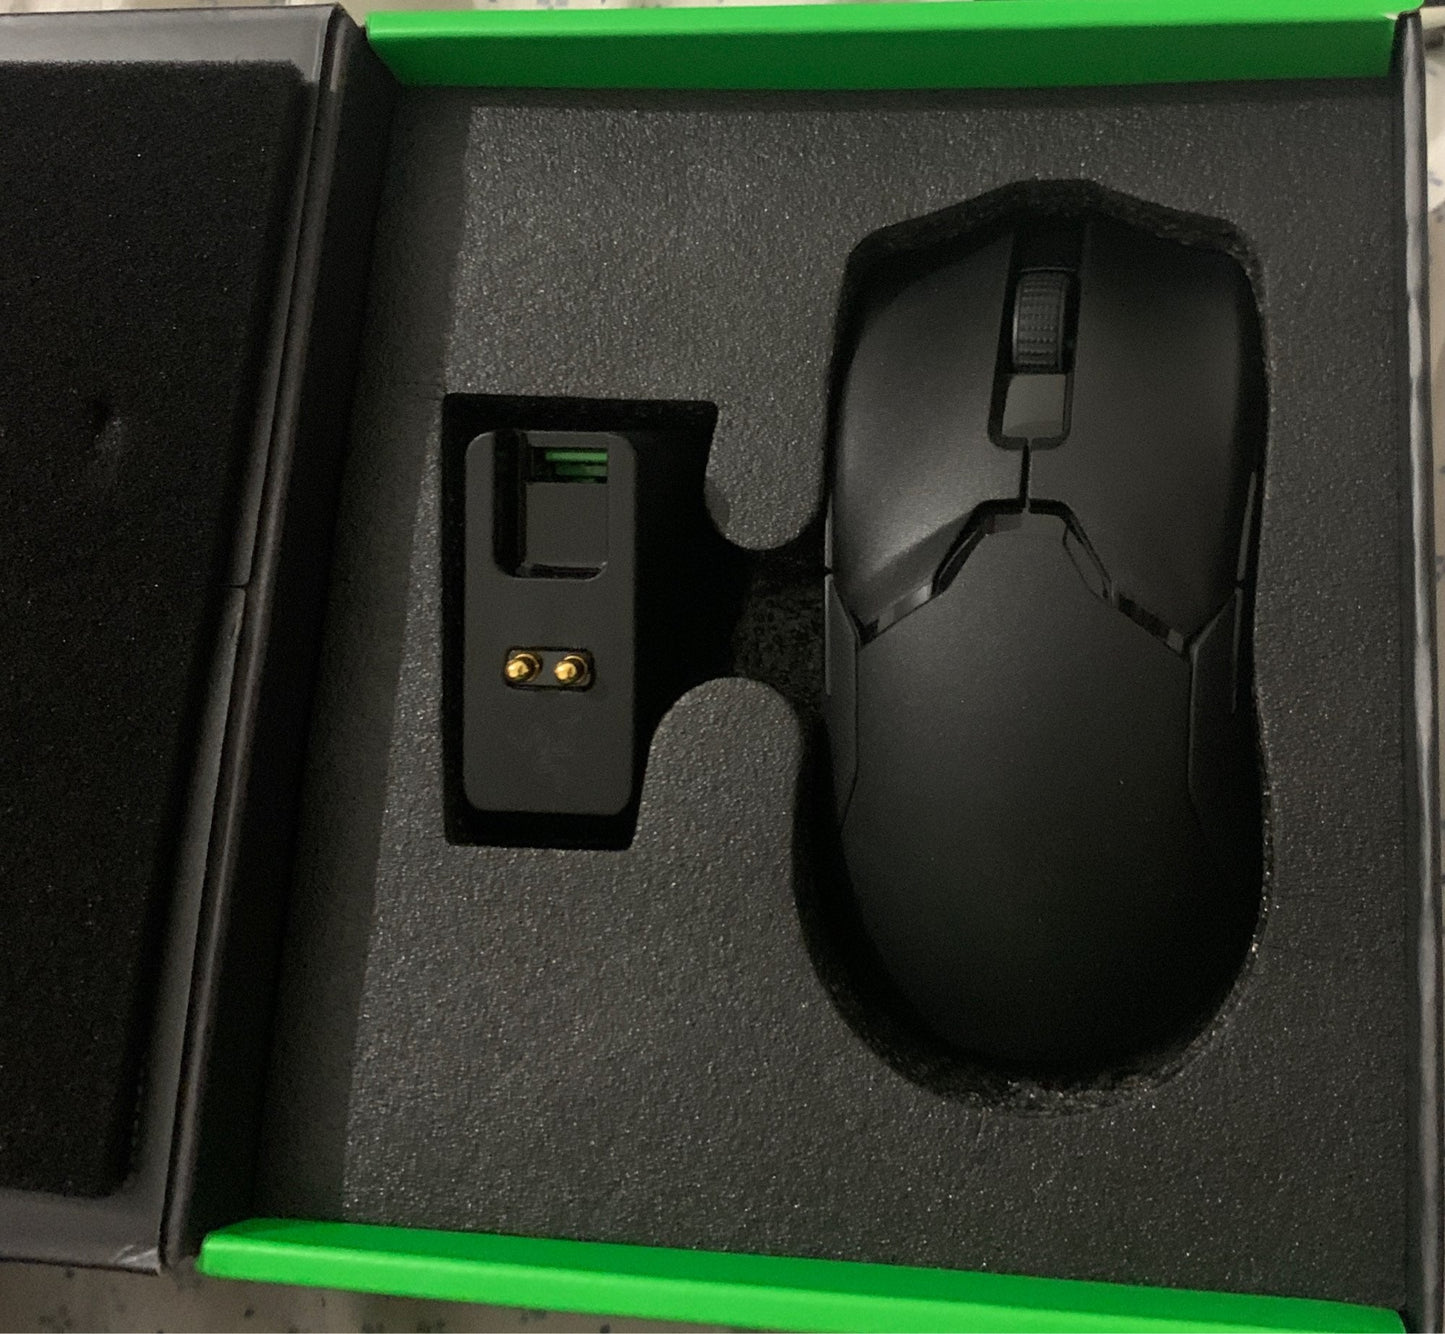 Razer Wireless Viper Ultimate Hyperspeed RGB Lightest Gaming Mouse Optical Sensor 20000DPI 8 Programmable Button for Computer baby magazin 